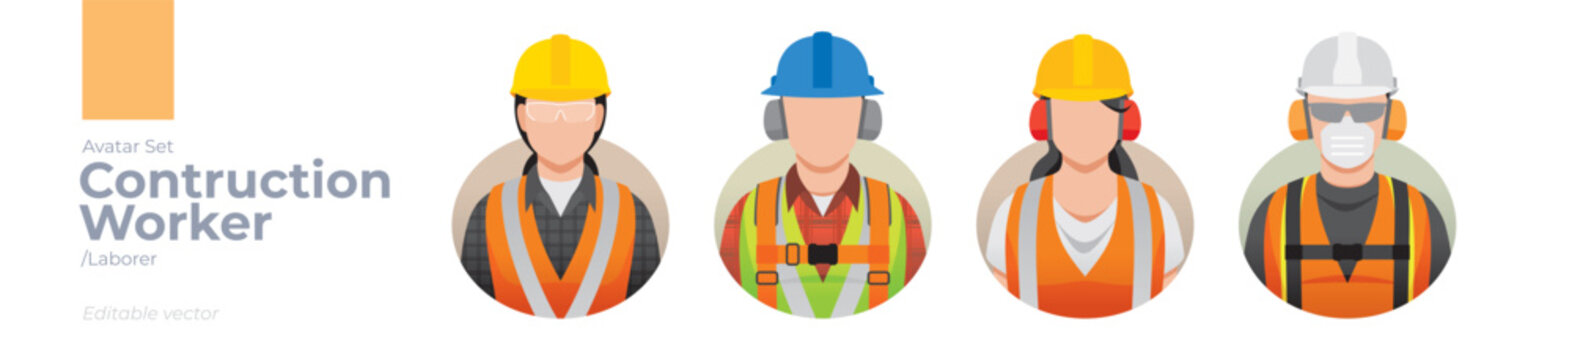 Construction worker picture avatar icons. Illustration of men and women wearing worker apron outfit